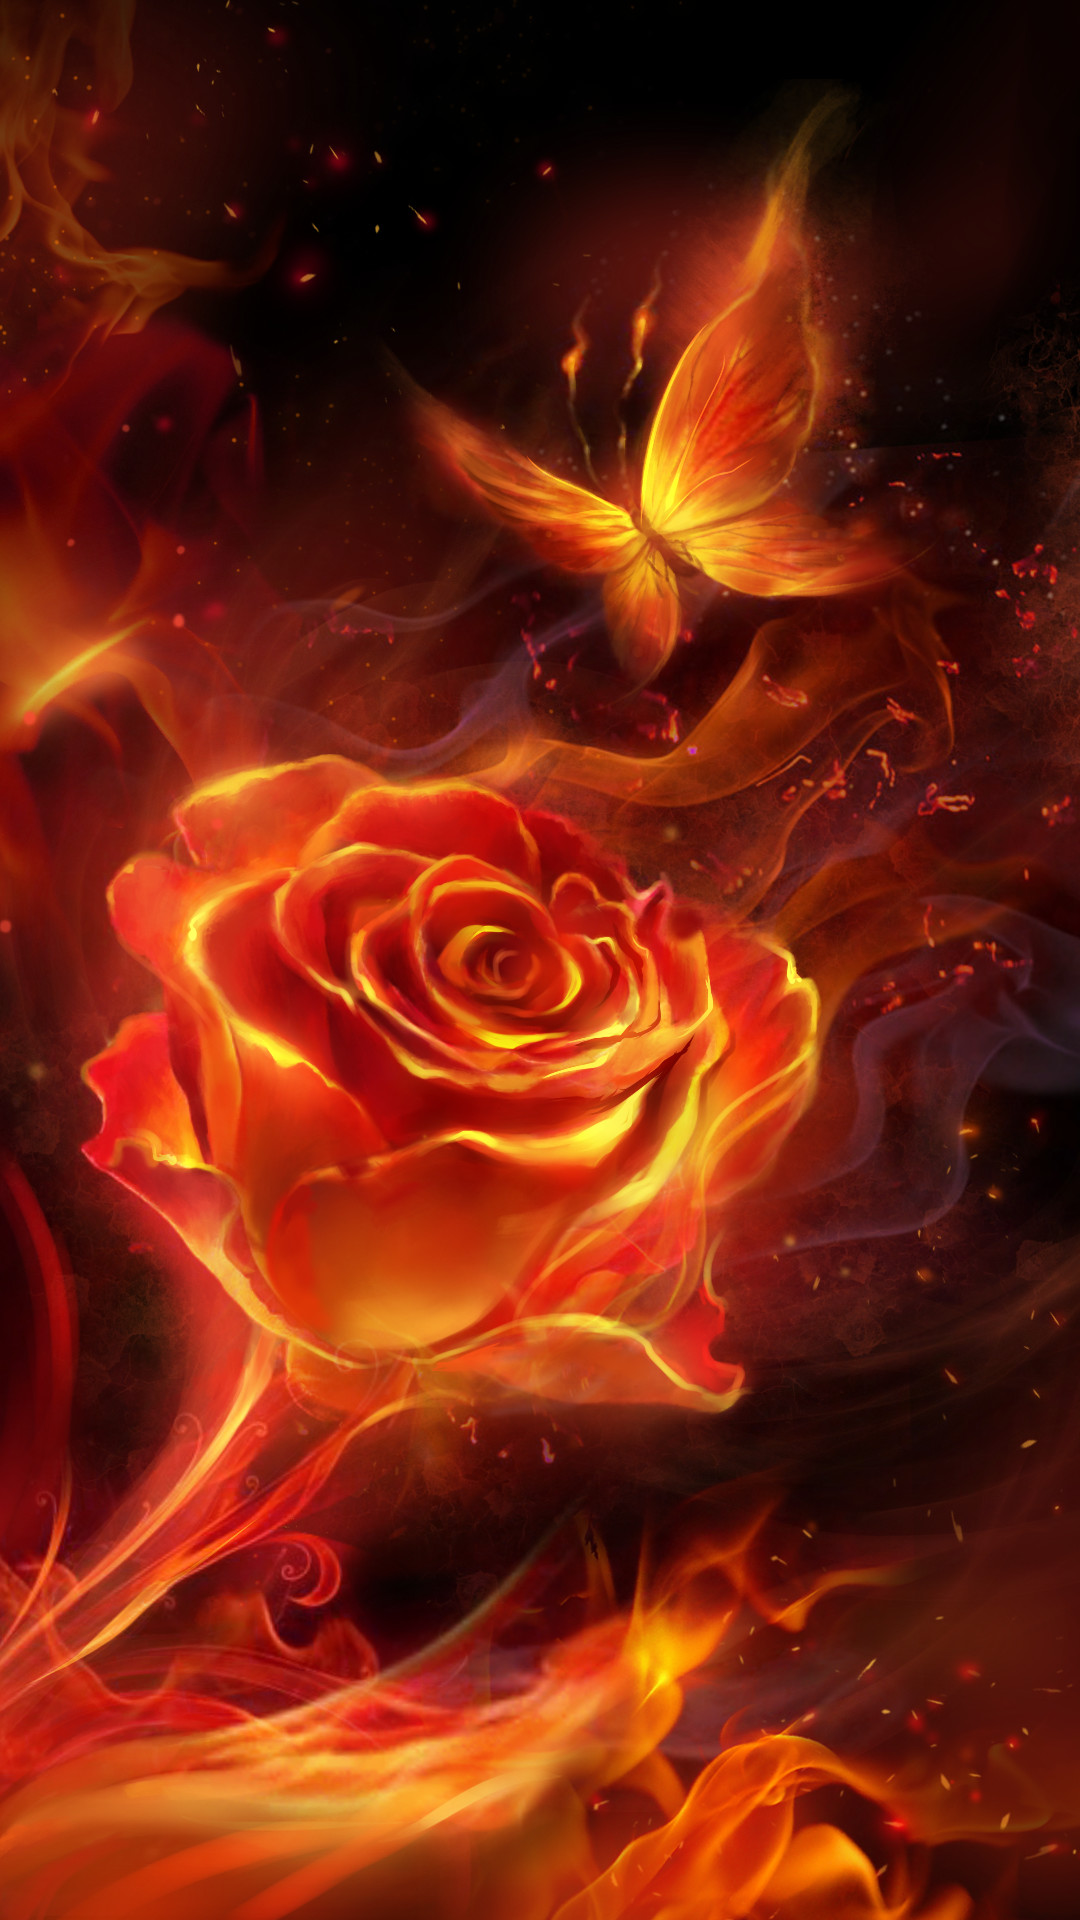 1080x1920, Fiery Rose And Butterfly Flame Live Wallpaper - Flame Rose - HD Wallpaper 